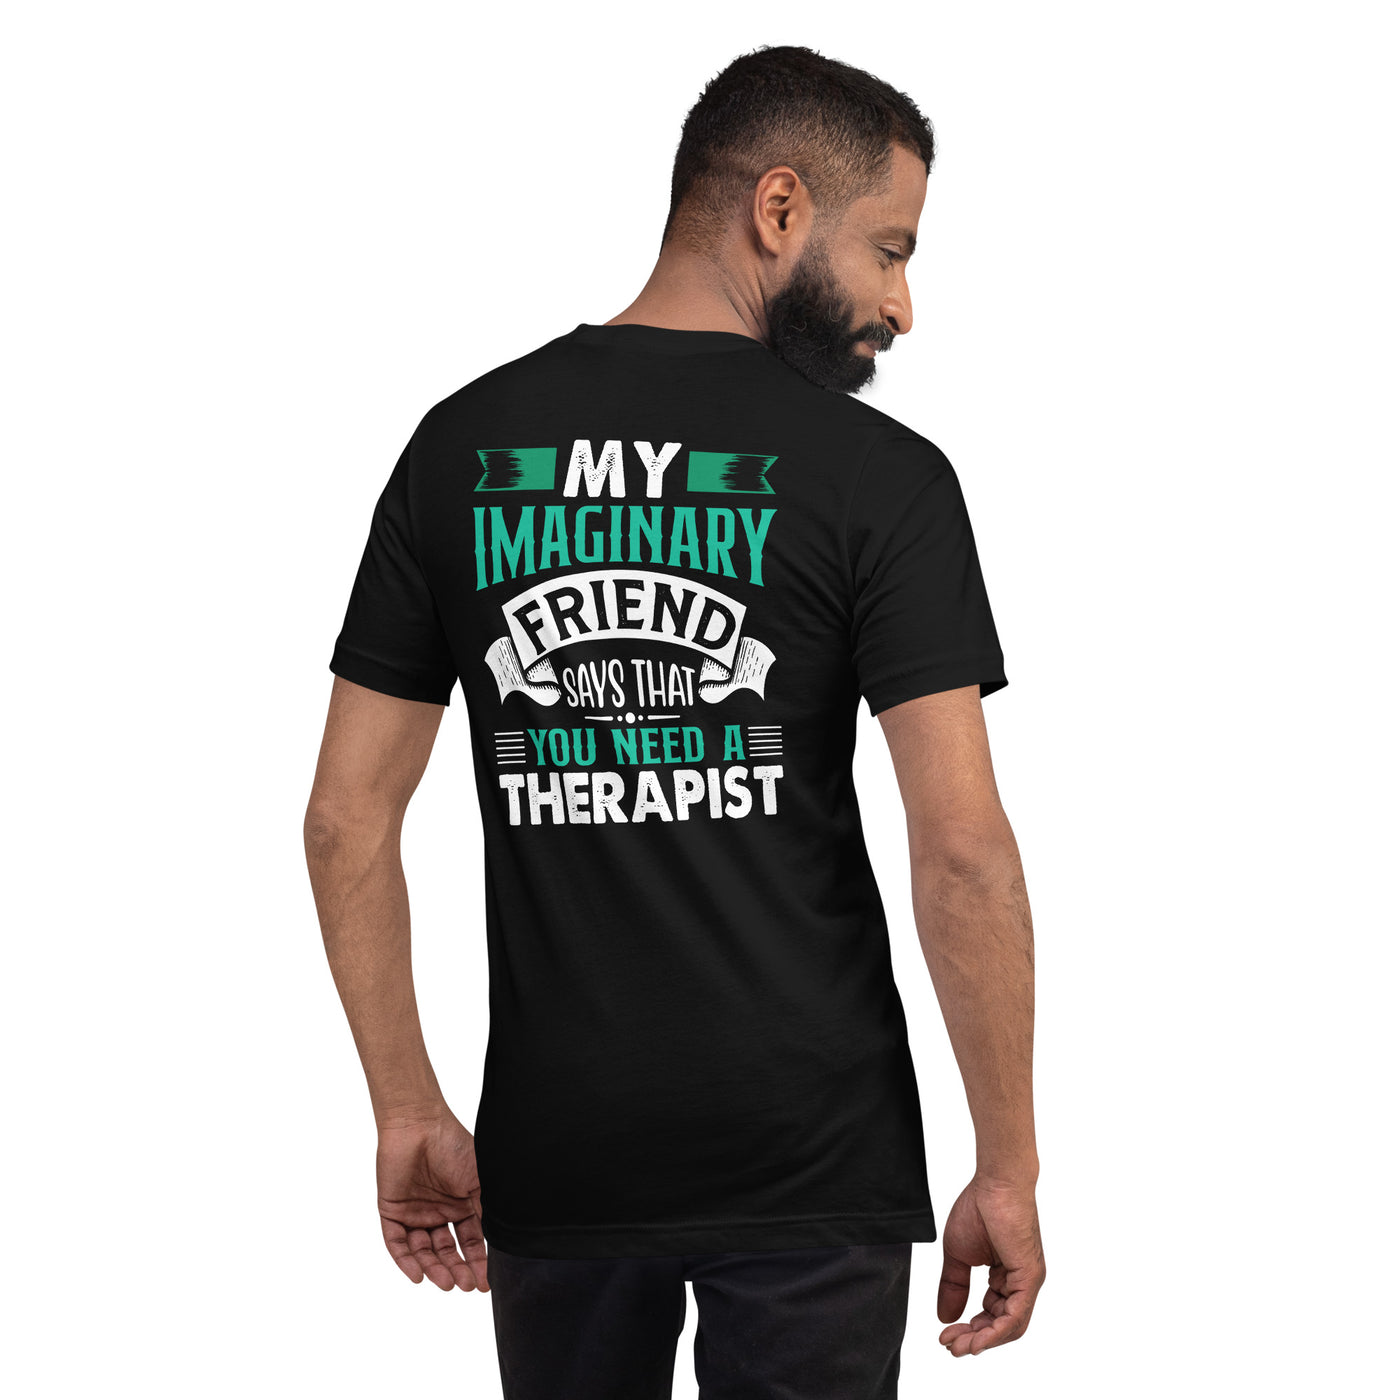 My imaginary friend Says you Need a therapist - Unisex t-shirt